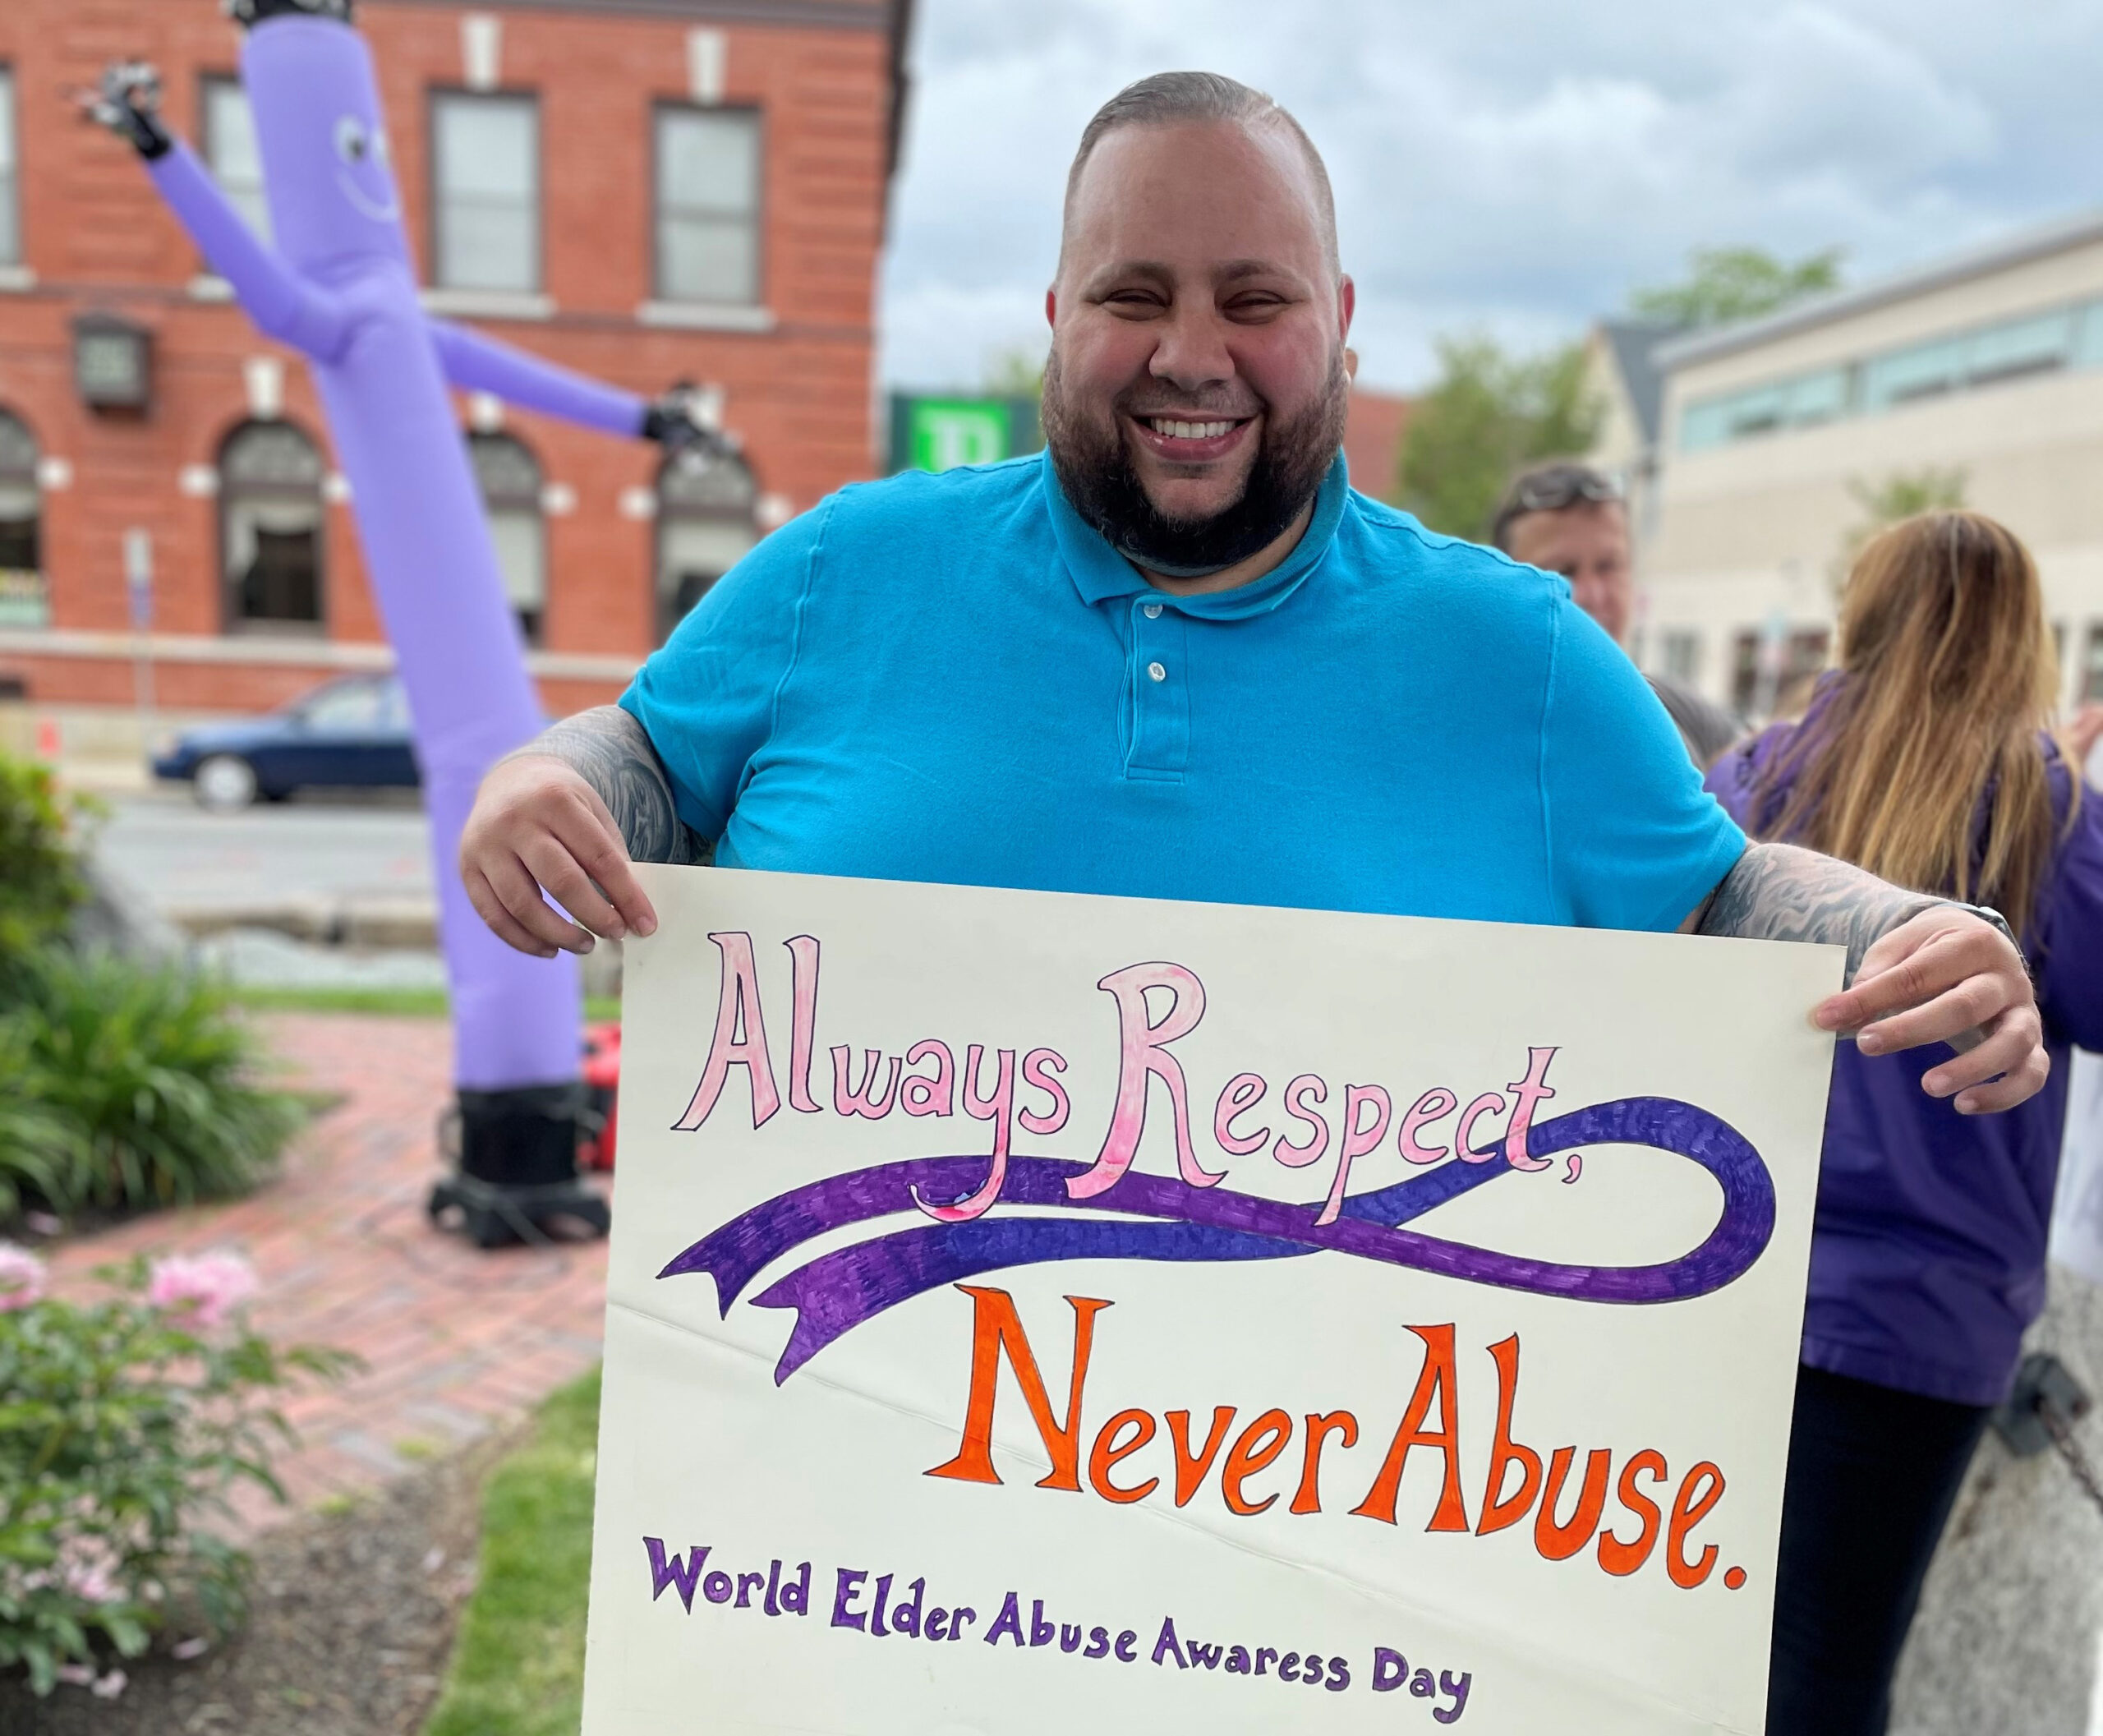 Beverly Council on Aging Director Christopher Gomez-Farewell at the 2023 Elder Abuse Awareness Rally in Beverly